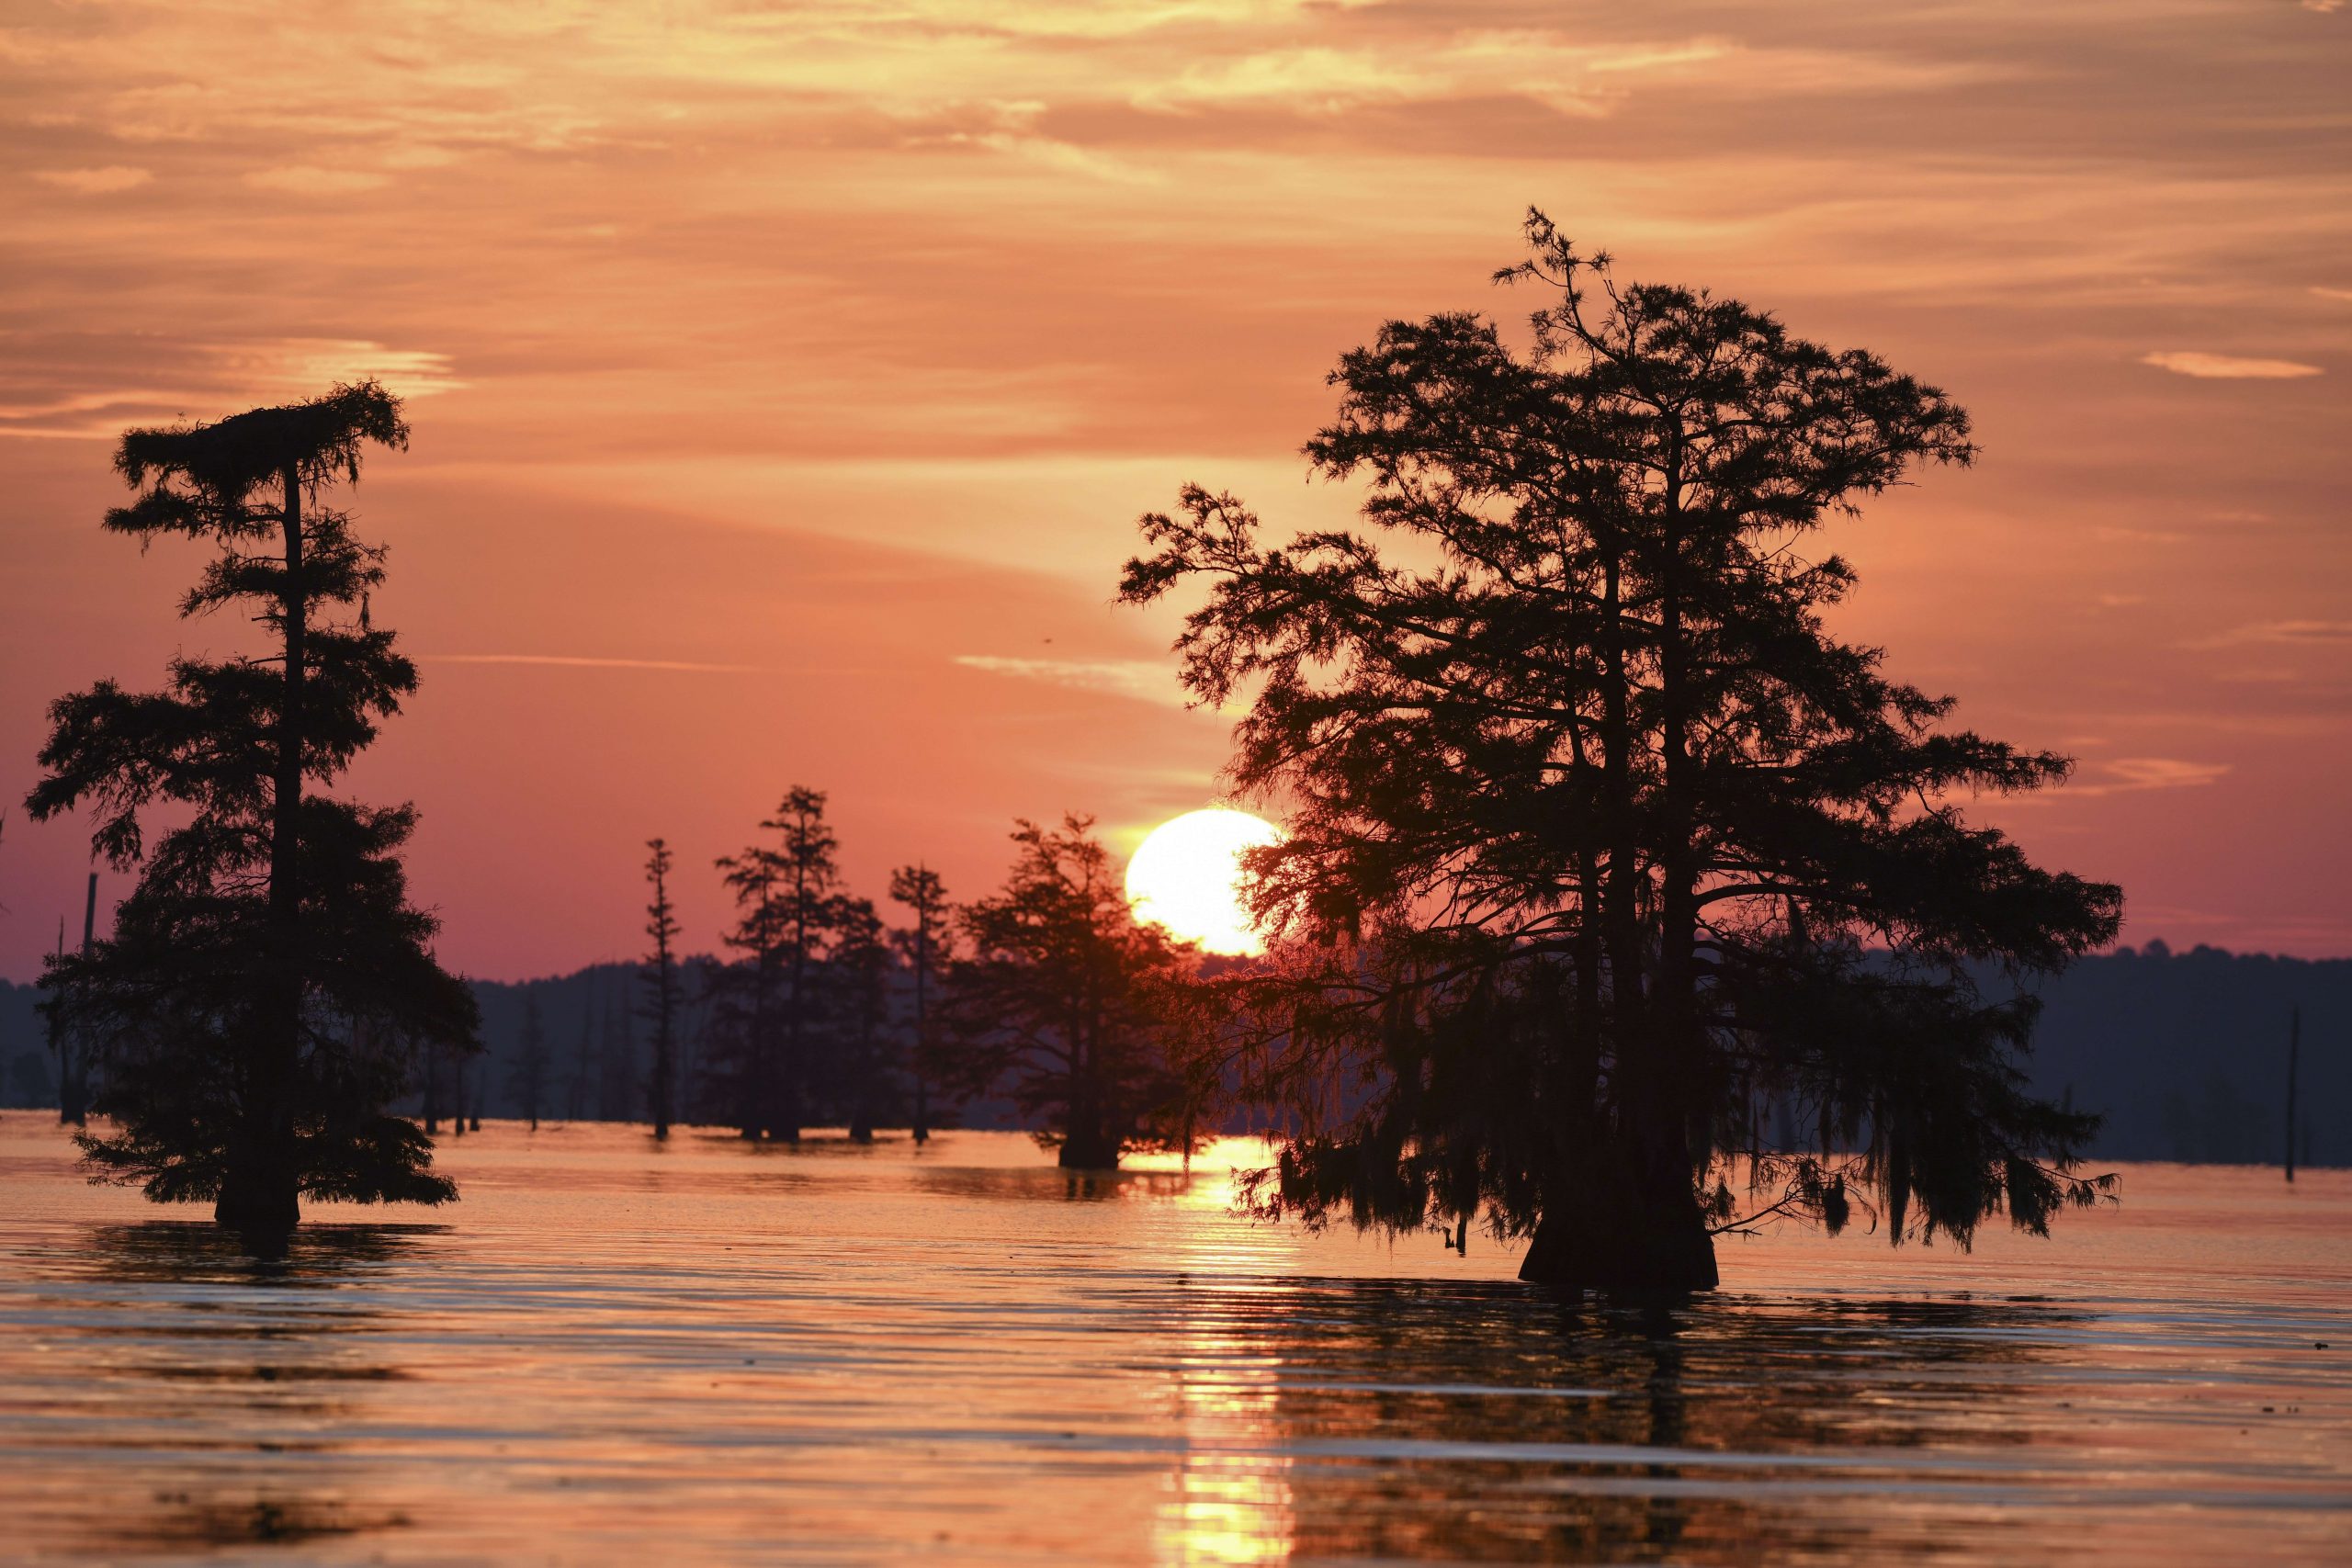 <h4>1. Santee Cooper Lakes (Marion/Moultrie), South Carolina</h4>[110,000 acres and 60,000 acres, respectively] <BR>These sister lakes have been a juggernaut on the rankings since the inception of the research. This year, Marion and Moultrie continue to prove they are a must-visit for every bass angler. A May CATT event here saw a winning weight of 25.64, and an early April derby took 27 pounds to win. That said, the real eye-opener was the late April CATT tournament that saw 33.31 pounds earn the first-place prize. Santee Cooper lakes have the secret sauce to produce giant bass and remain the crown jewel of South Carolina bass fishing.